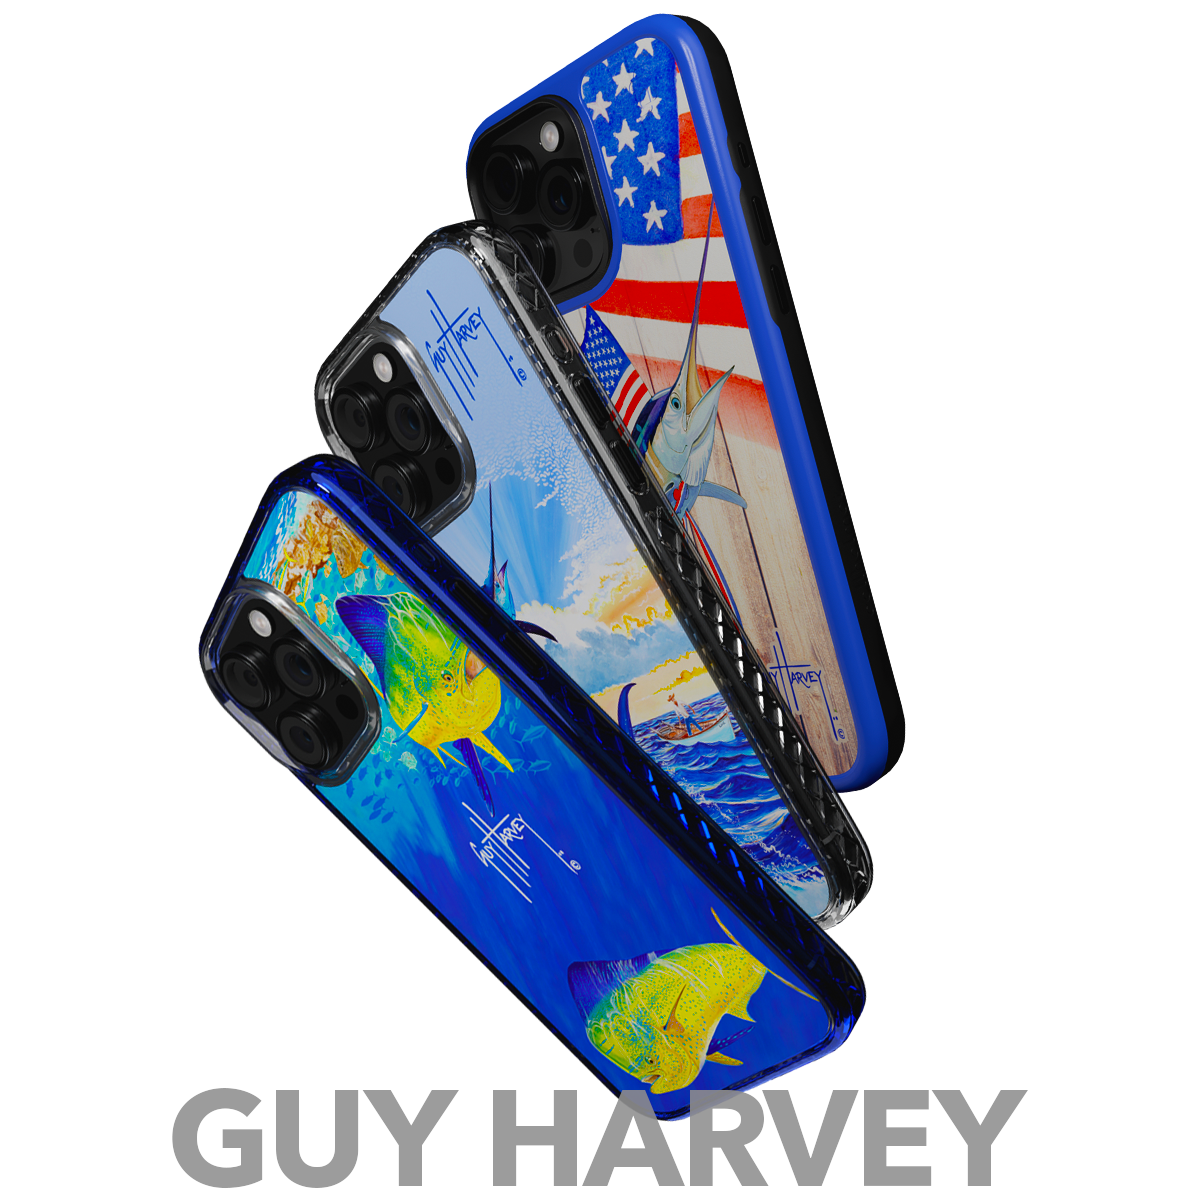 assortment of cases with fish print